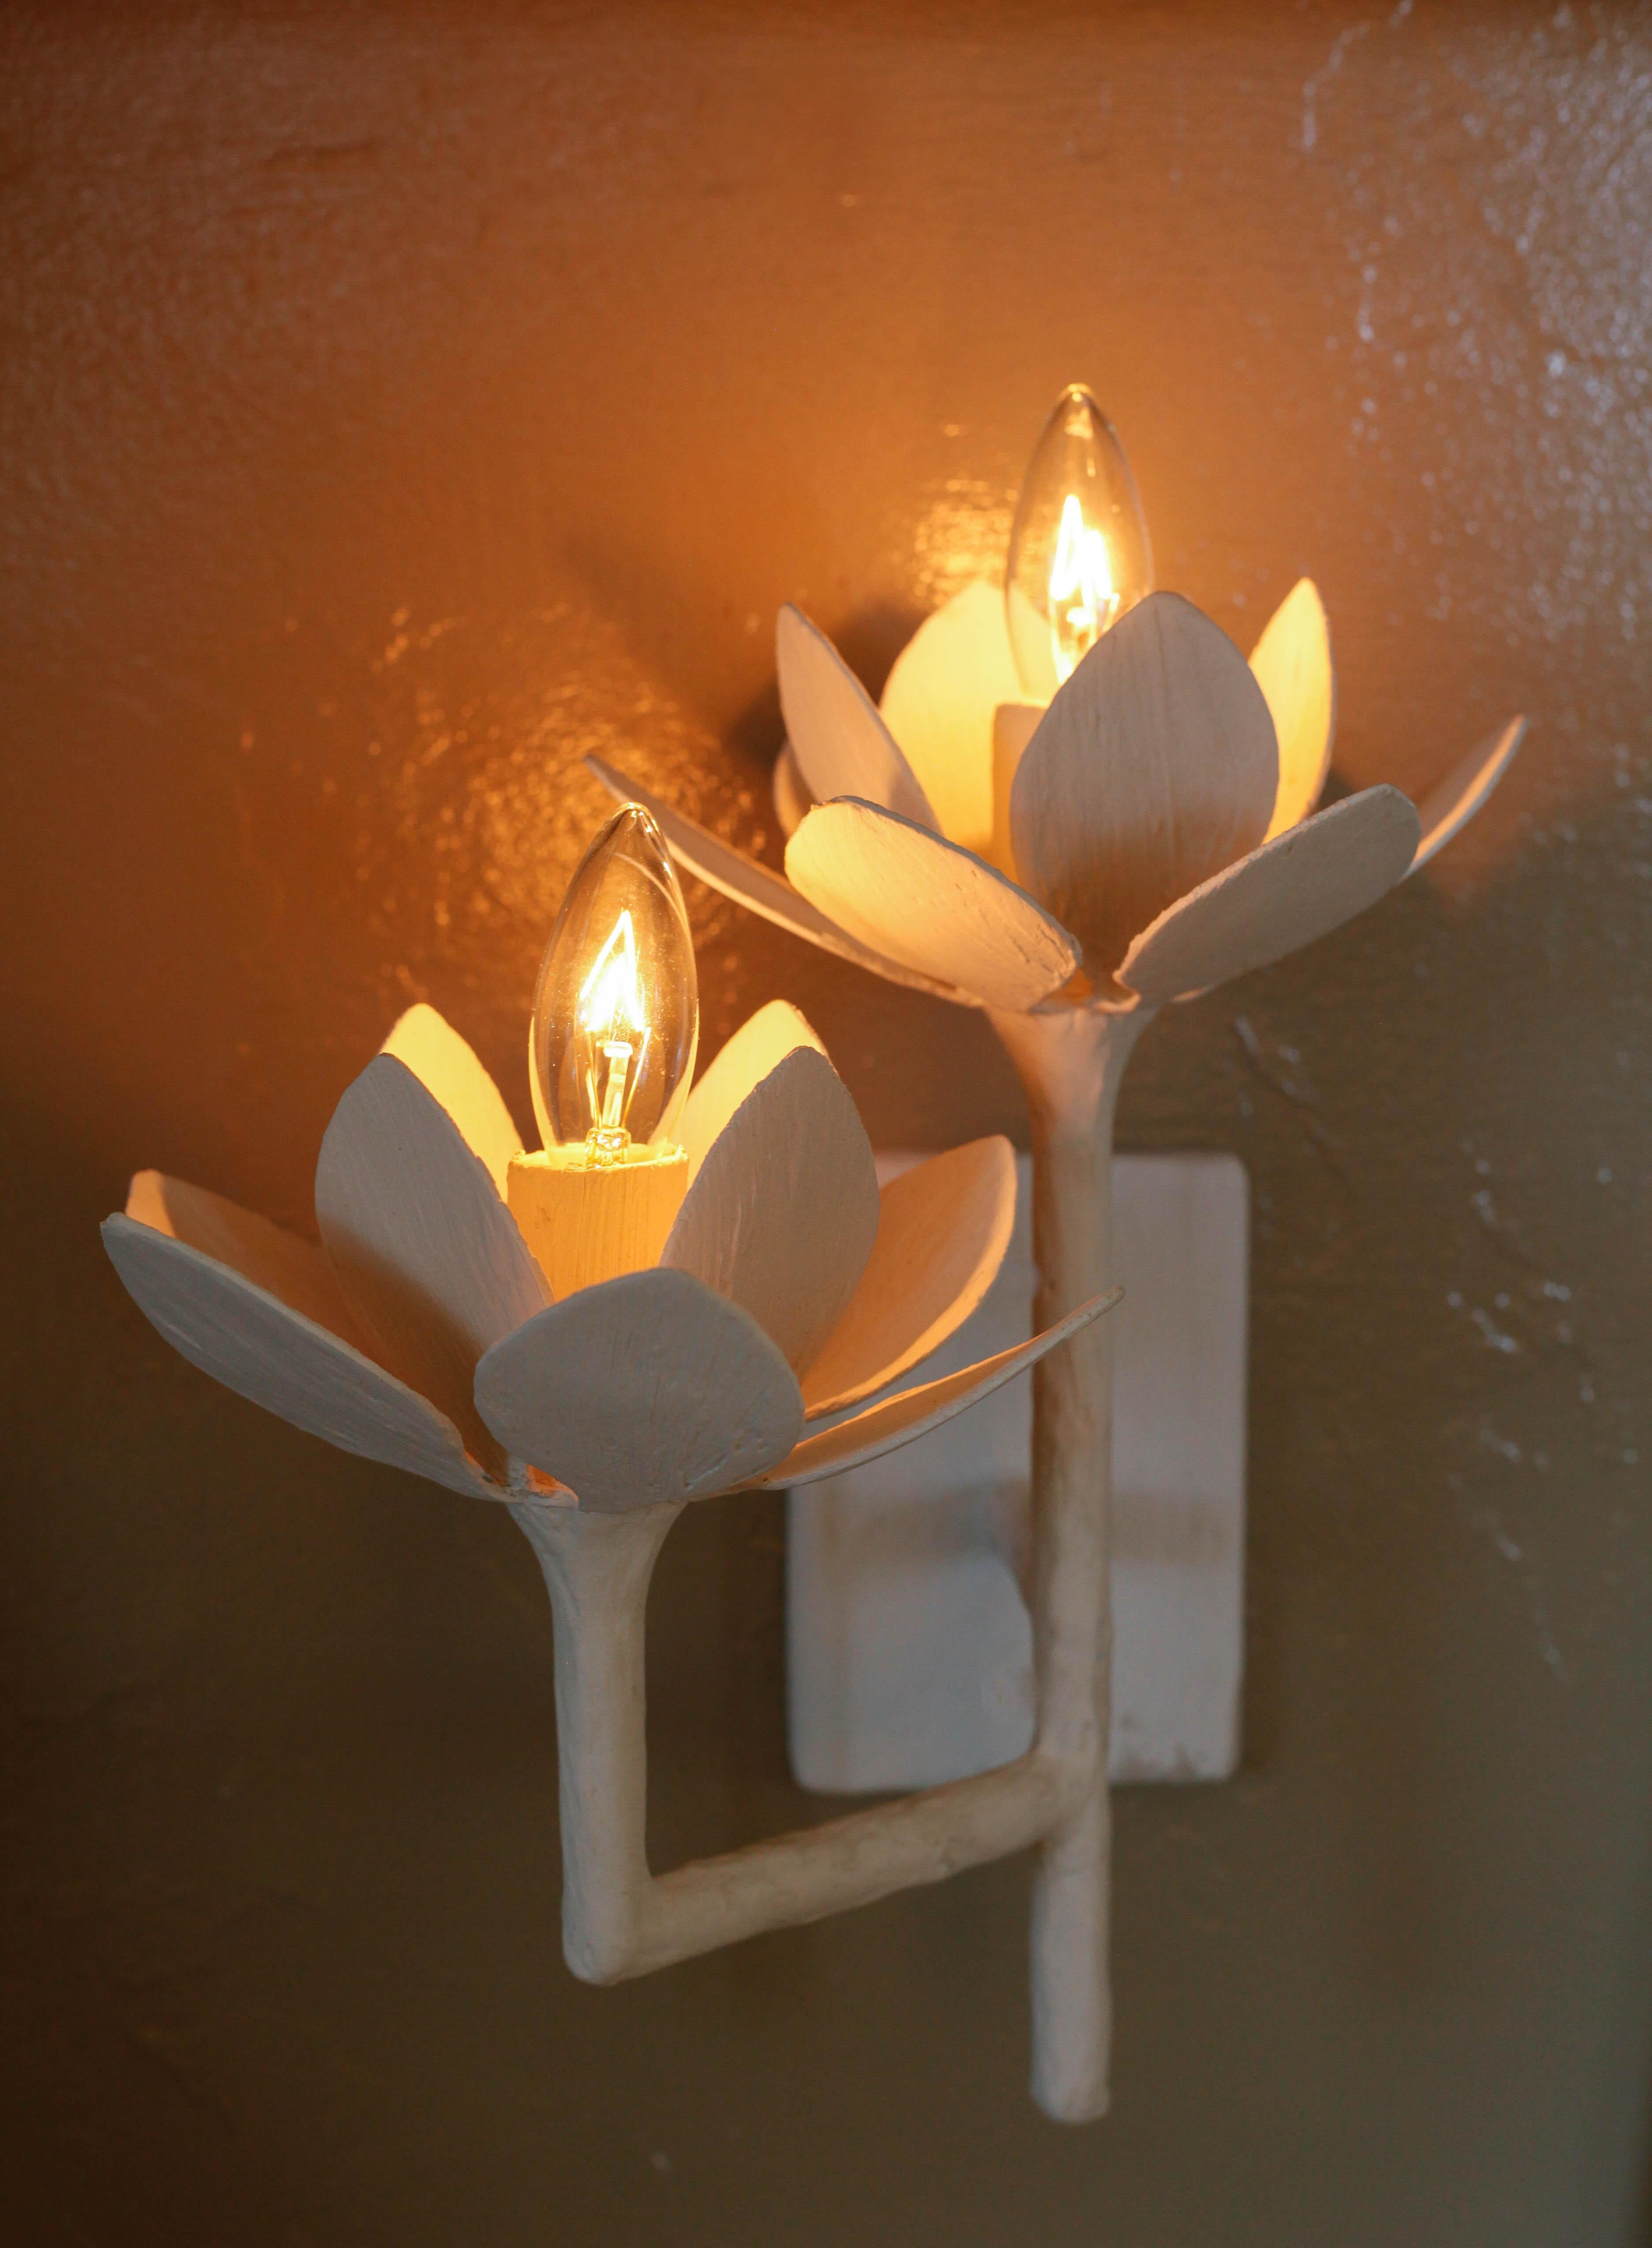 Double lotus flower sconce by Tracey Garet of Apsara Interior Design. Each 6.5